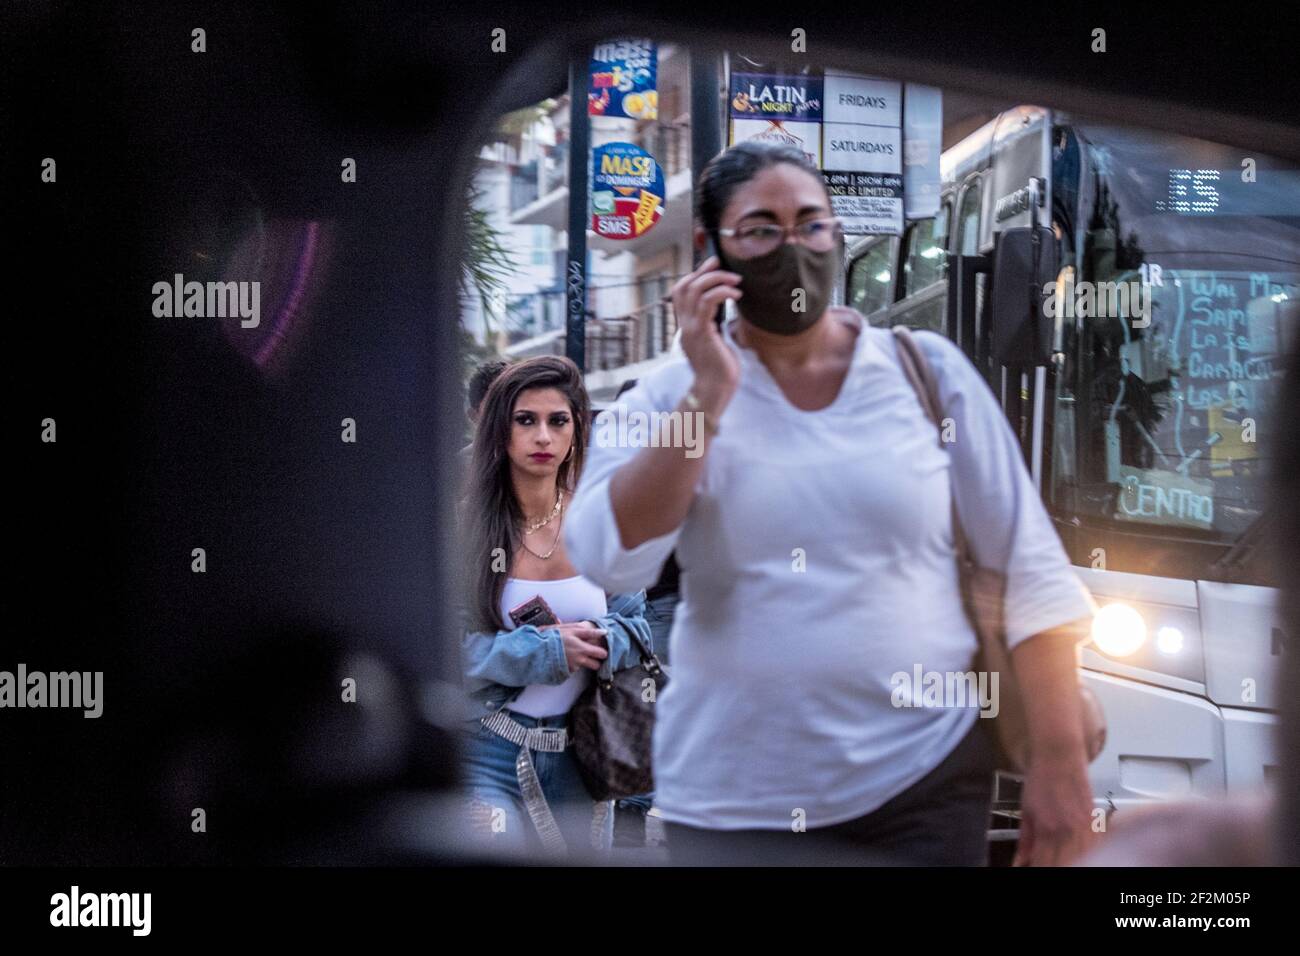 Two women, one with a mask and one without a mask, walk on a street in Mexico Stock Photo